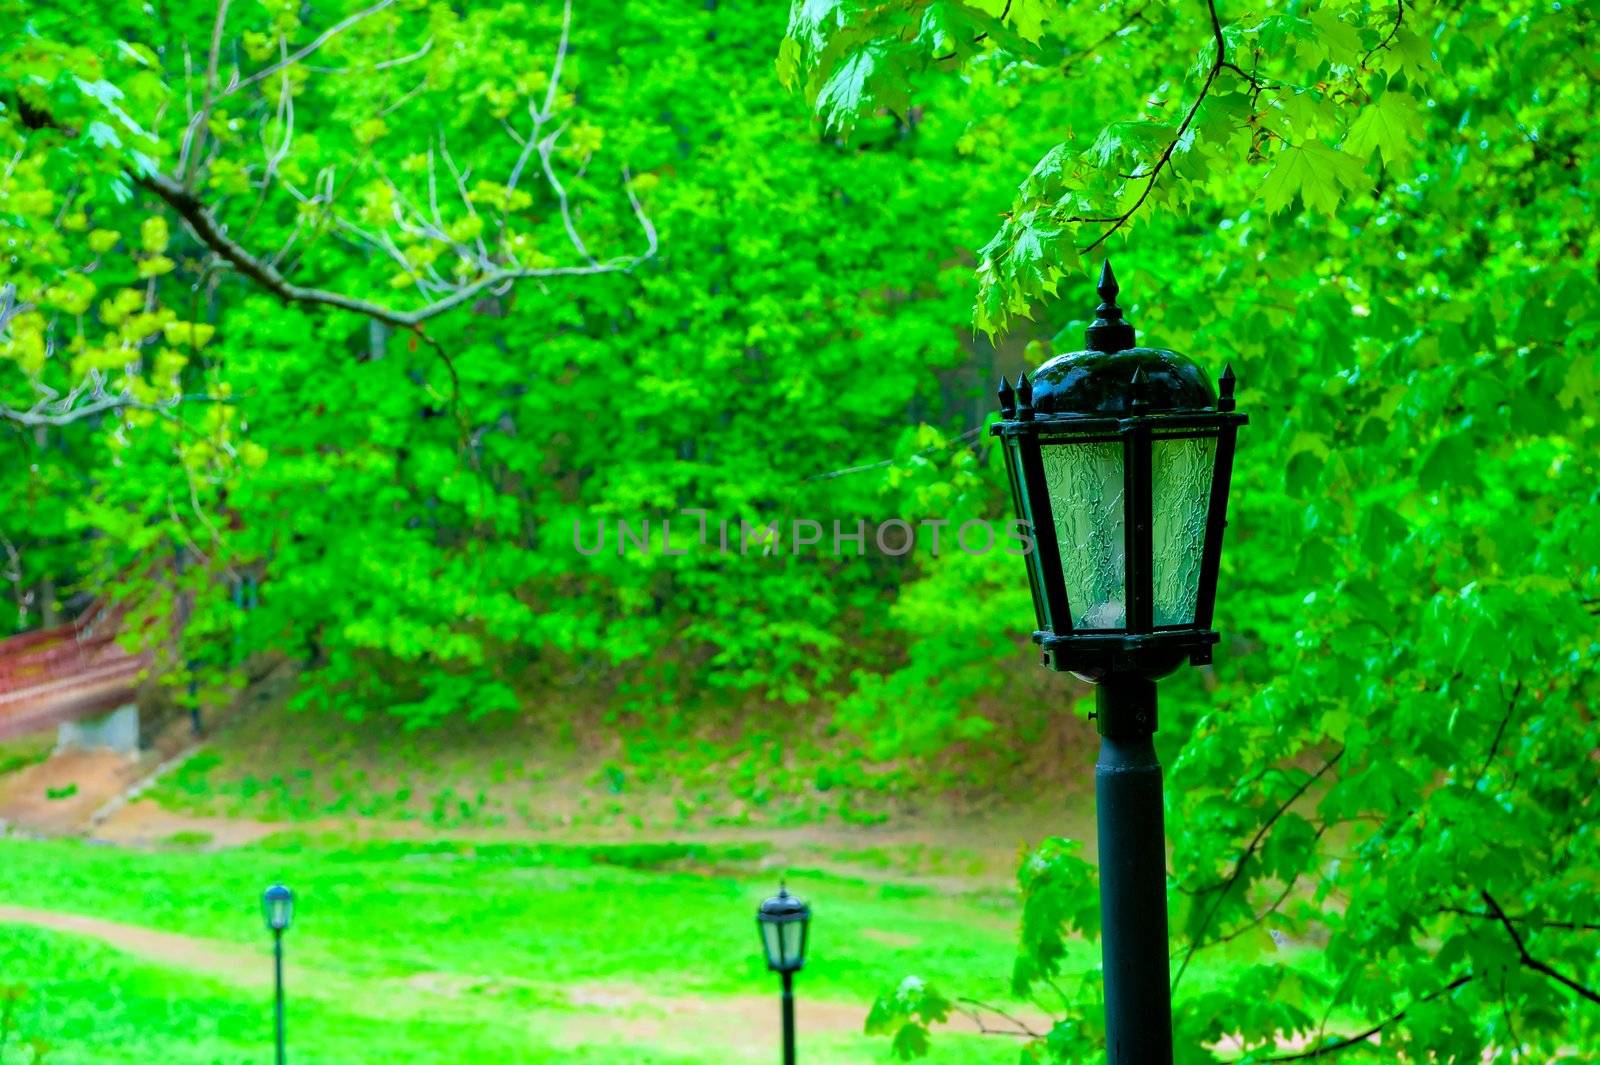 Street lamp in the old style, in the park